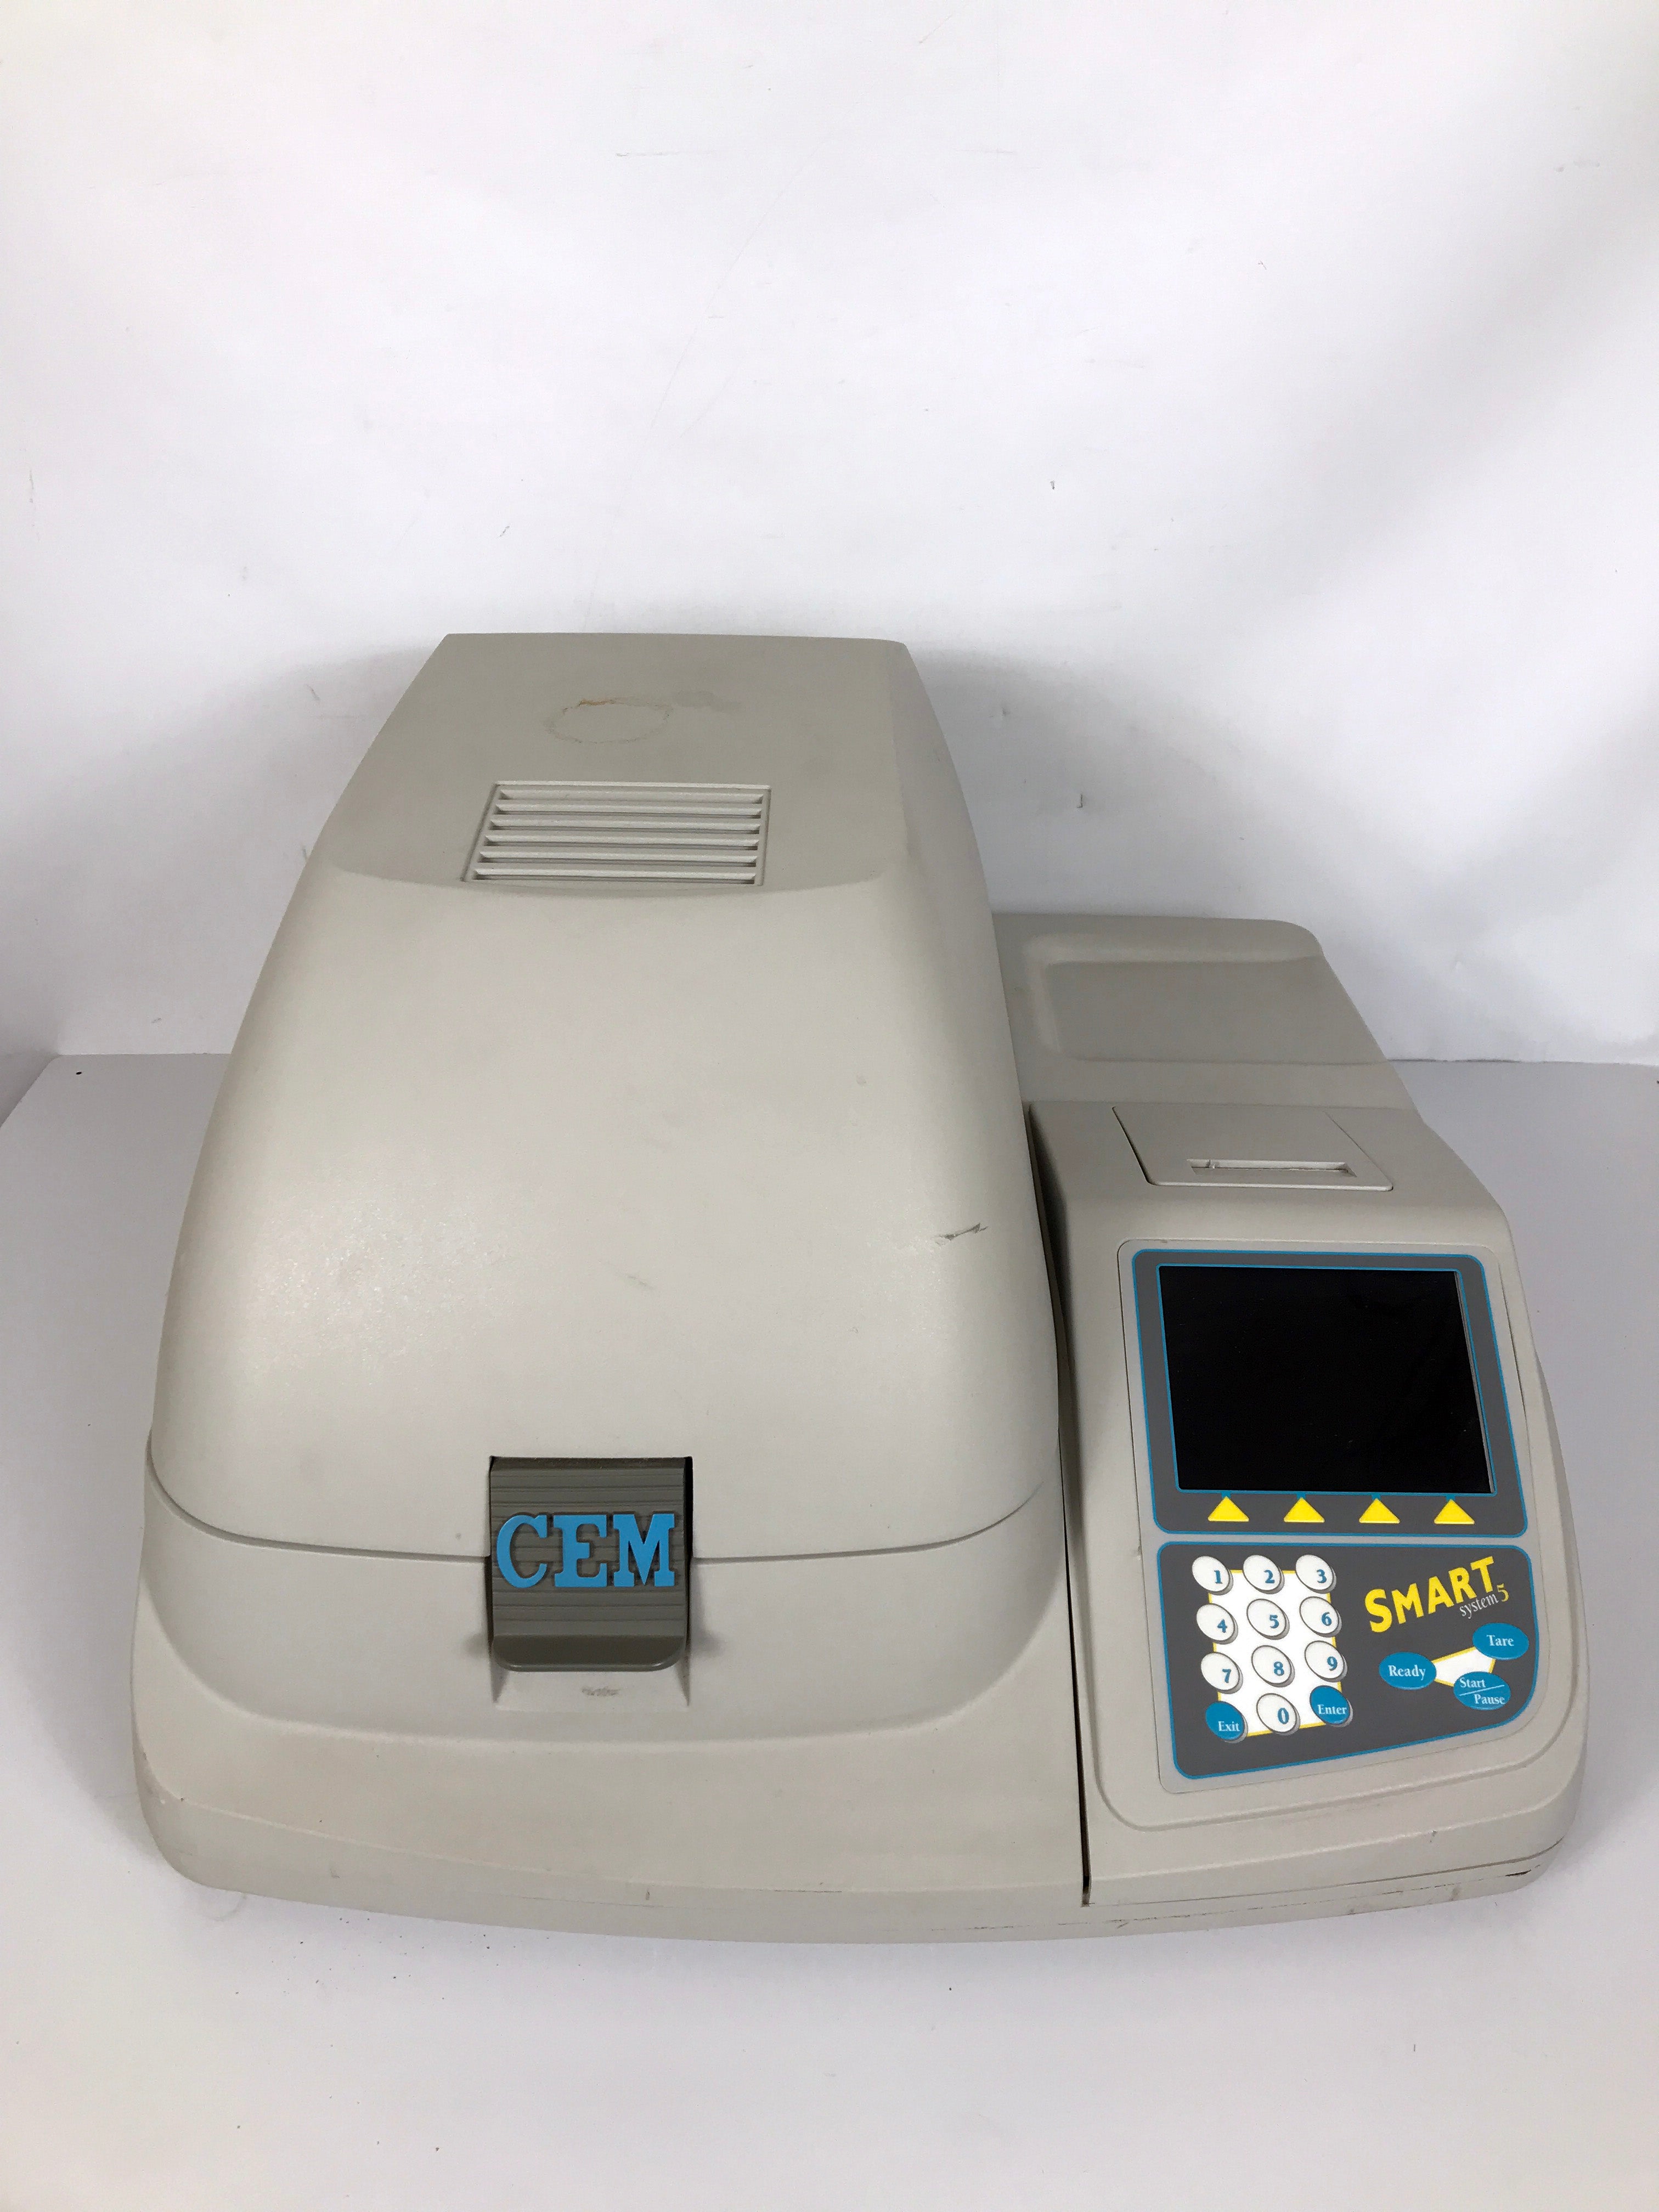 CEM Smart 5 System SP-1117 Microwave Moisture Analyzer *For Parts or Repair*